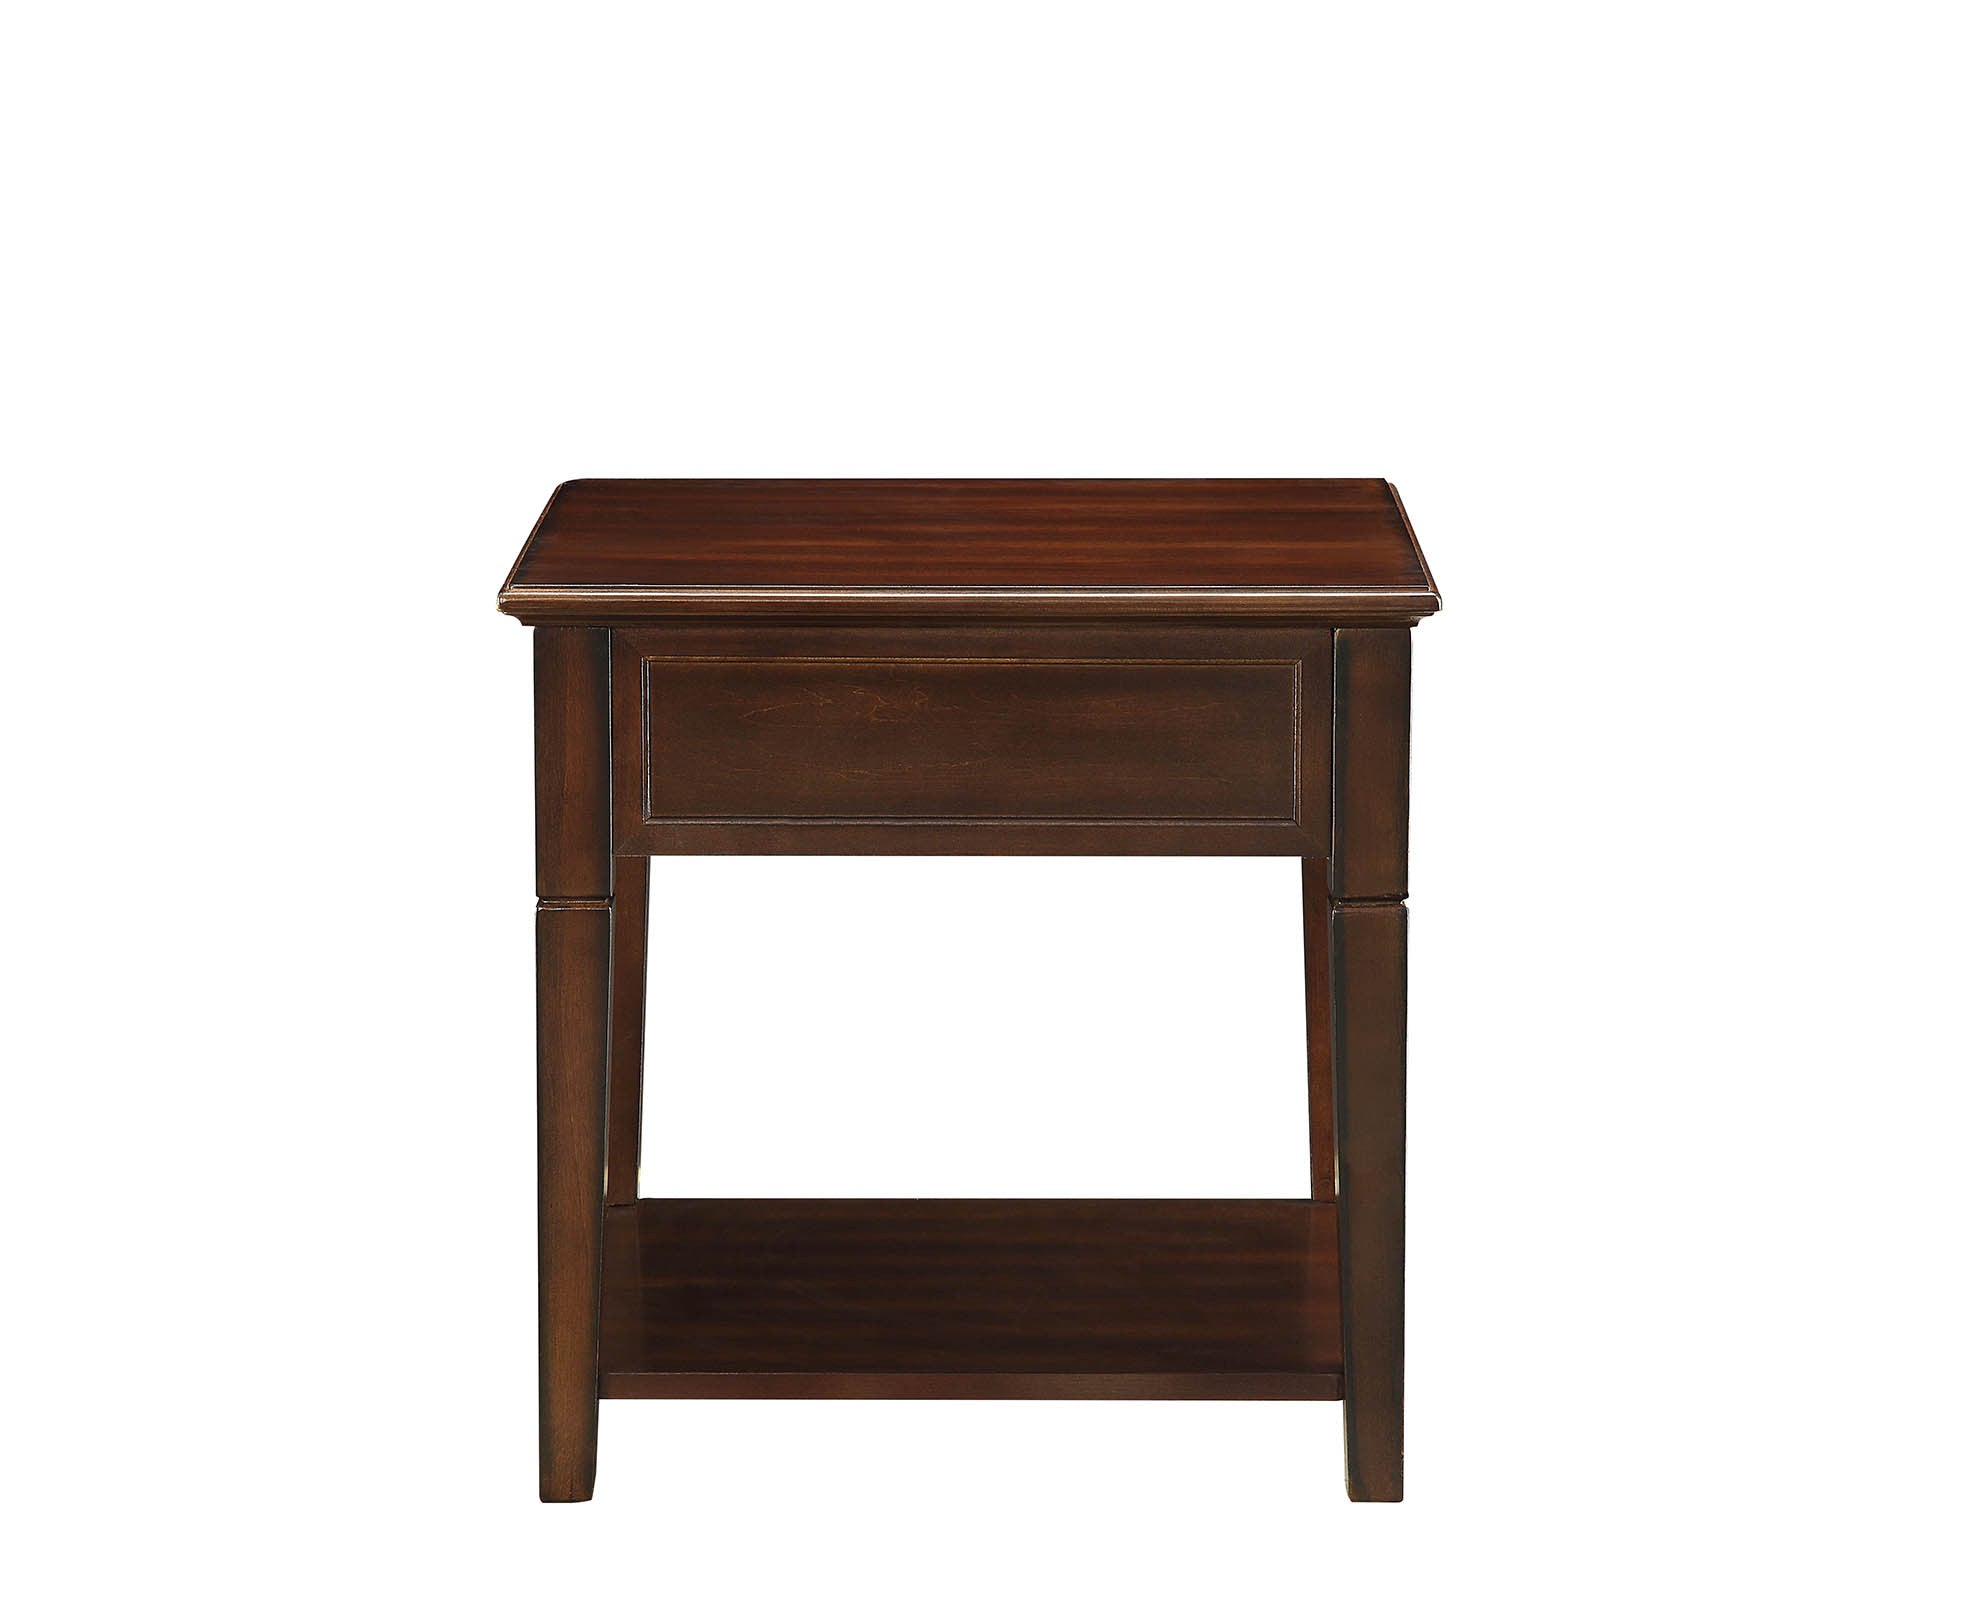 24" Walnut Manufactured Wood Rectangular End Table With Drawer And Shelf